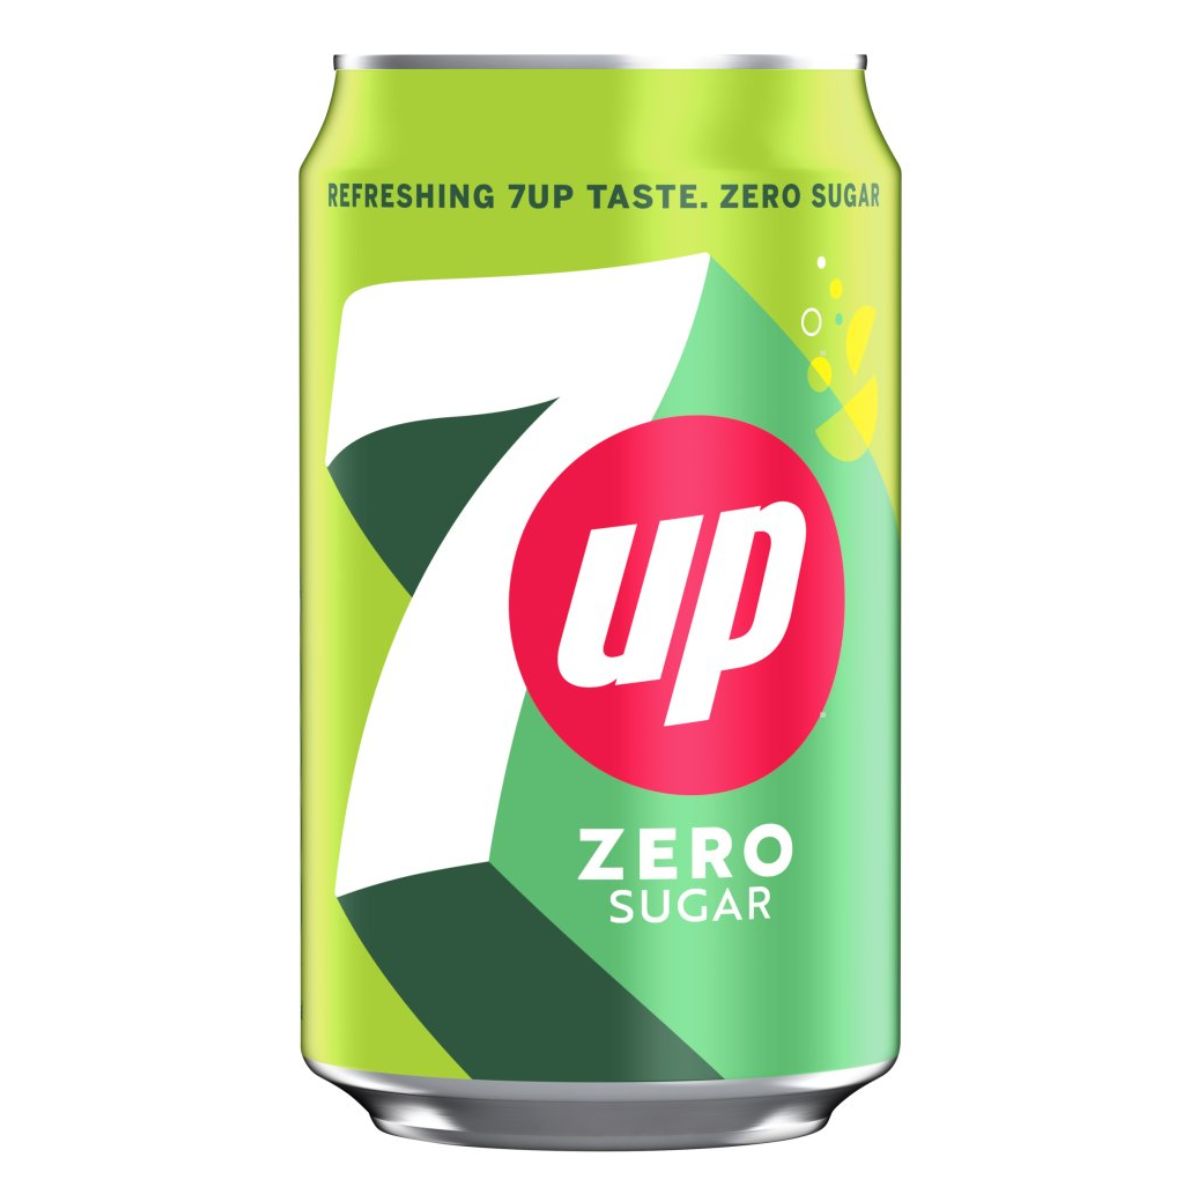 A can of 7up - Zero Sugar Lemon & Lime Can - 330ml on a white background.